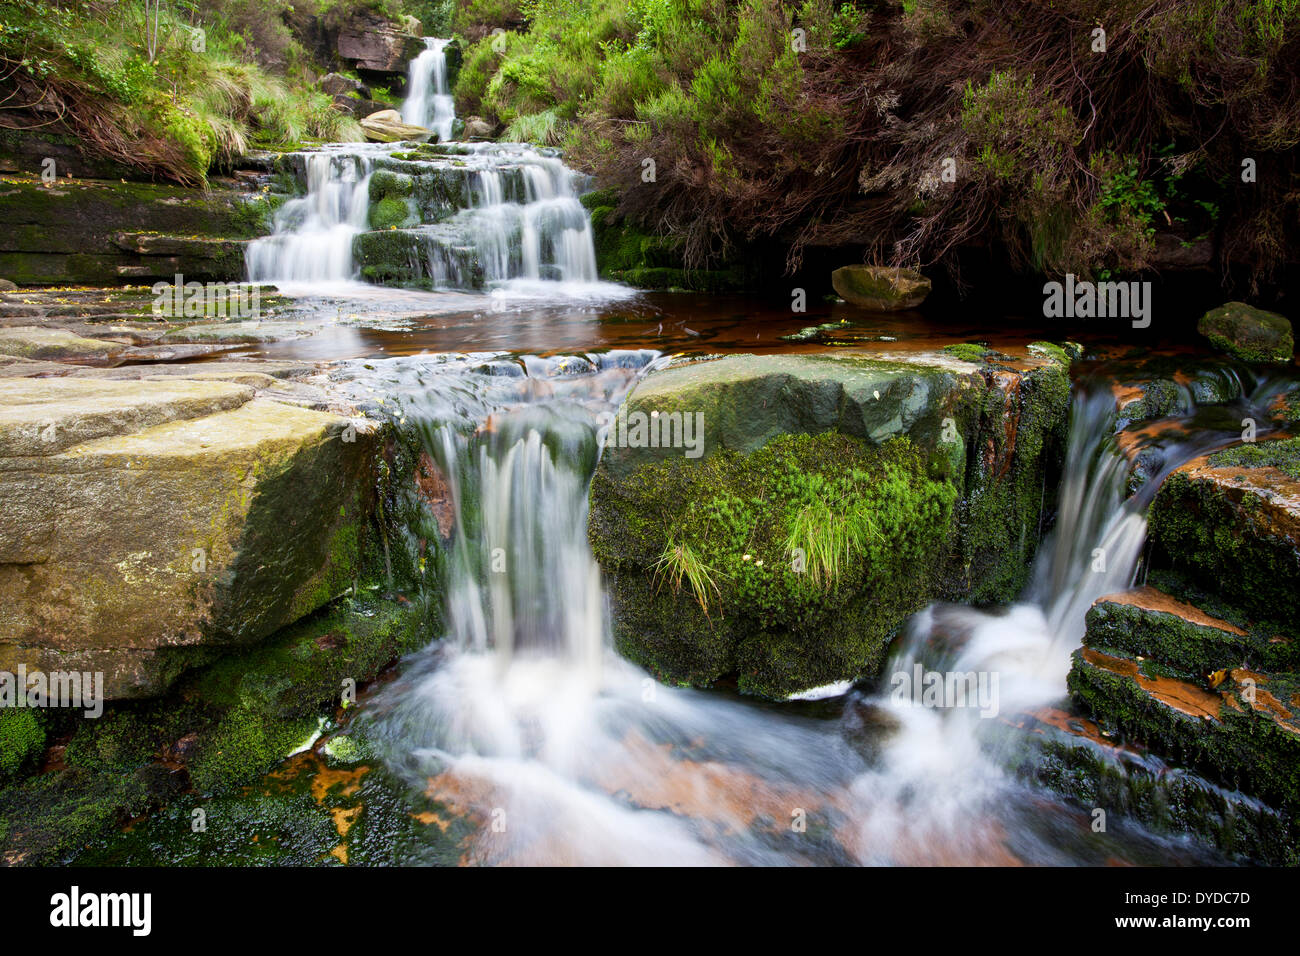 Black Clough Falls running off of Bleaklow in the Peak District National Park. Stock Photo